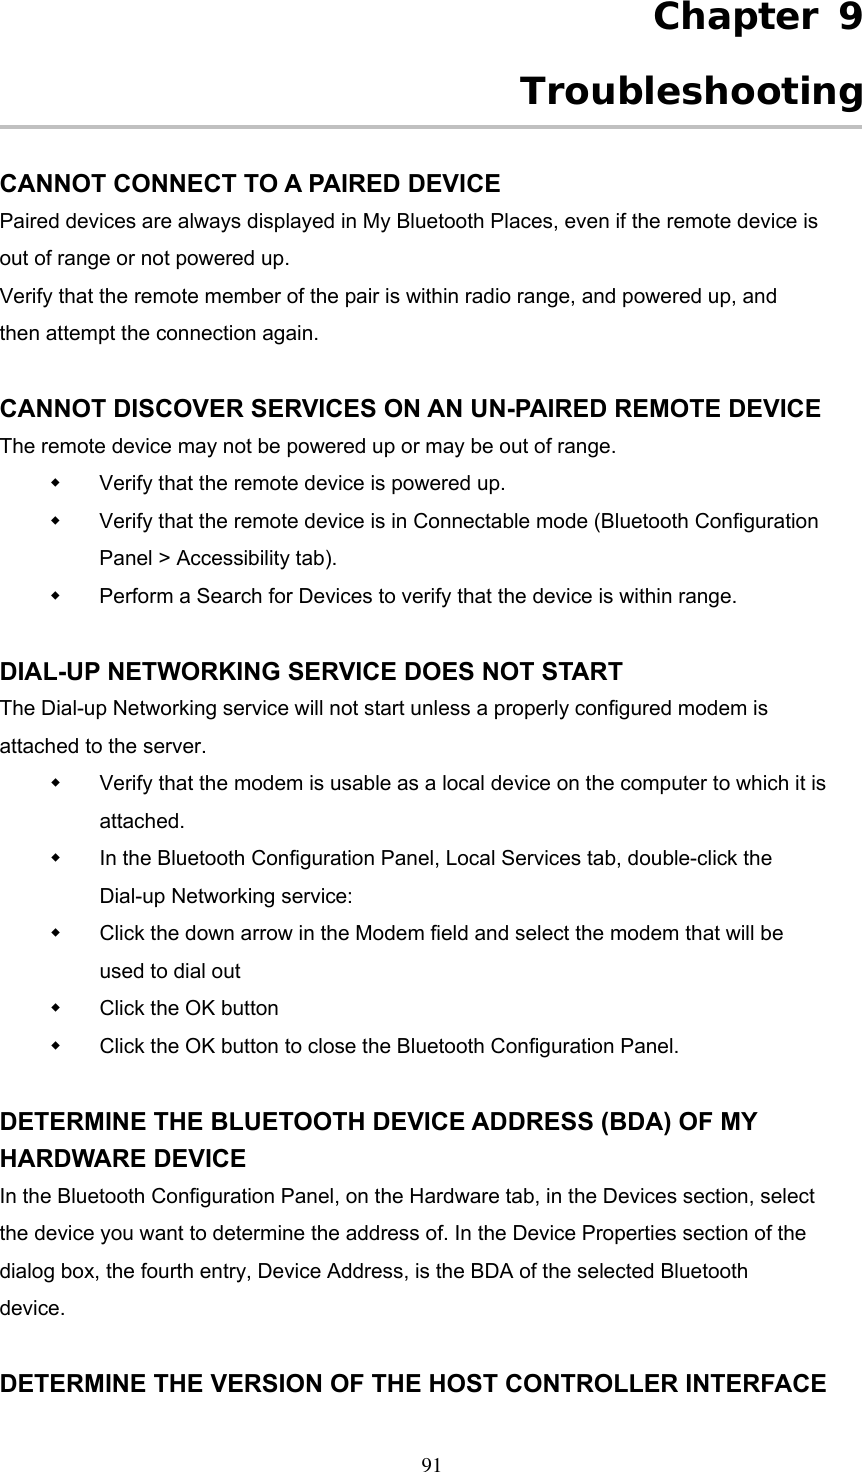 Chapter 9 Troubleshooting  CANNOT CONNECT TO A PAIRED DEVICE Paired devices are always displayed in My Bluetooth Places, even if the remote device is out of range or not powered up. Verify that the remote member of the pair is within radio range, and powered up, and then attempt the connection again.  CANNOT DISCOVER SERVICES ON AN UN-PAIRED REMOTE DEVICE The remote device may not be powered up or may be out of range.   Verify that the remote device is powered up.   Verify that the remote device is in Connectable mode (Bluetooth Configuration Panel &gt; Accessibility tab).   Perform a Search for Devices to verify that the device is within range.  DIAL-UP NETWORKING SERVICE DOES NOT START The Dial-up Networking service will not start unless a properly configured modem is attached to the server.   Verify that the modem is usable as a local device on the computer to which it is attached.   In the Bluetooth Configuration Panel, Local Services tab, double-click the Dial-up Networking service:   Click the down arrow in the Modem field and select the modem that will be used to dial out   Click the OK button   Click the OK button to close the Bluetooth Configuration Panel.  DETERMINE THE BLUETOOTH DEVICE ADDRESS (BDA) OF MY HARDWARE DEVICE In the Bluetooth Configuration Panel, on the Hardware tab, in the Devices section, select the device you want to determine the address of. In the Device Properties section of the dialog box, the fourth entry, Device Address, is the BDA of the selected Bluetooth device.  DETERMINE THE VERSION OF THE HOST CONTROLLER INTERFACE  91 